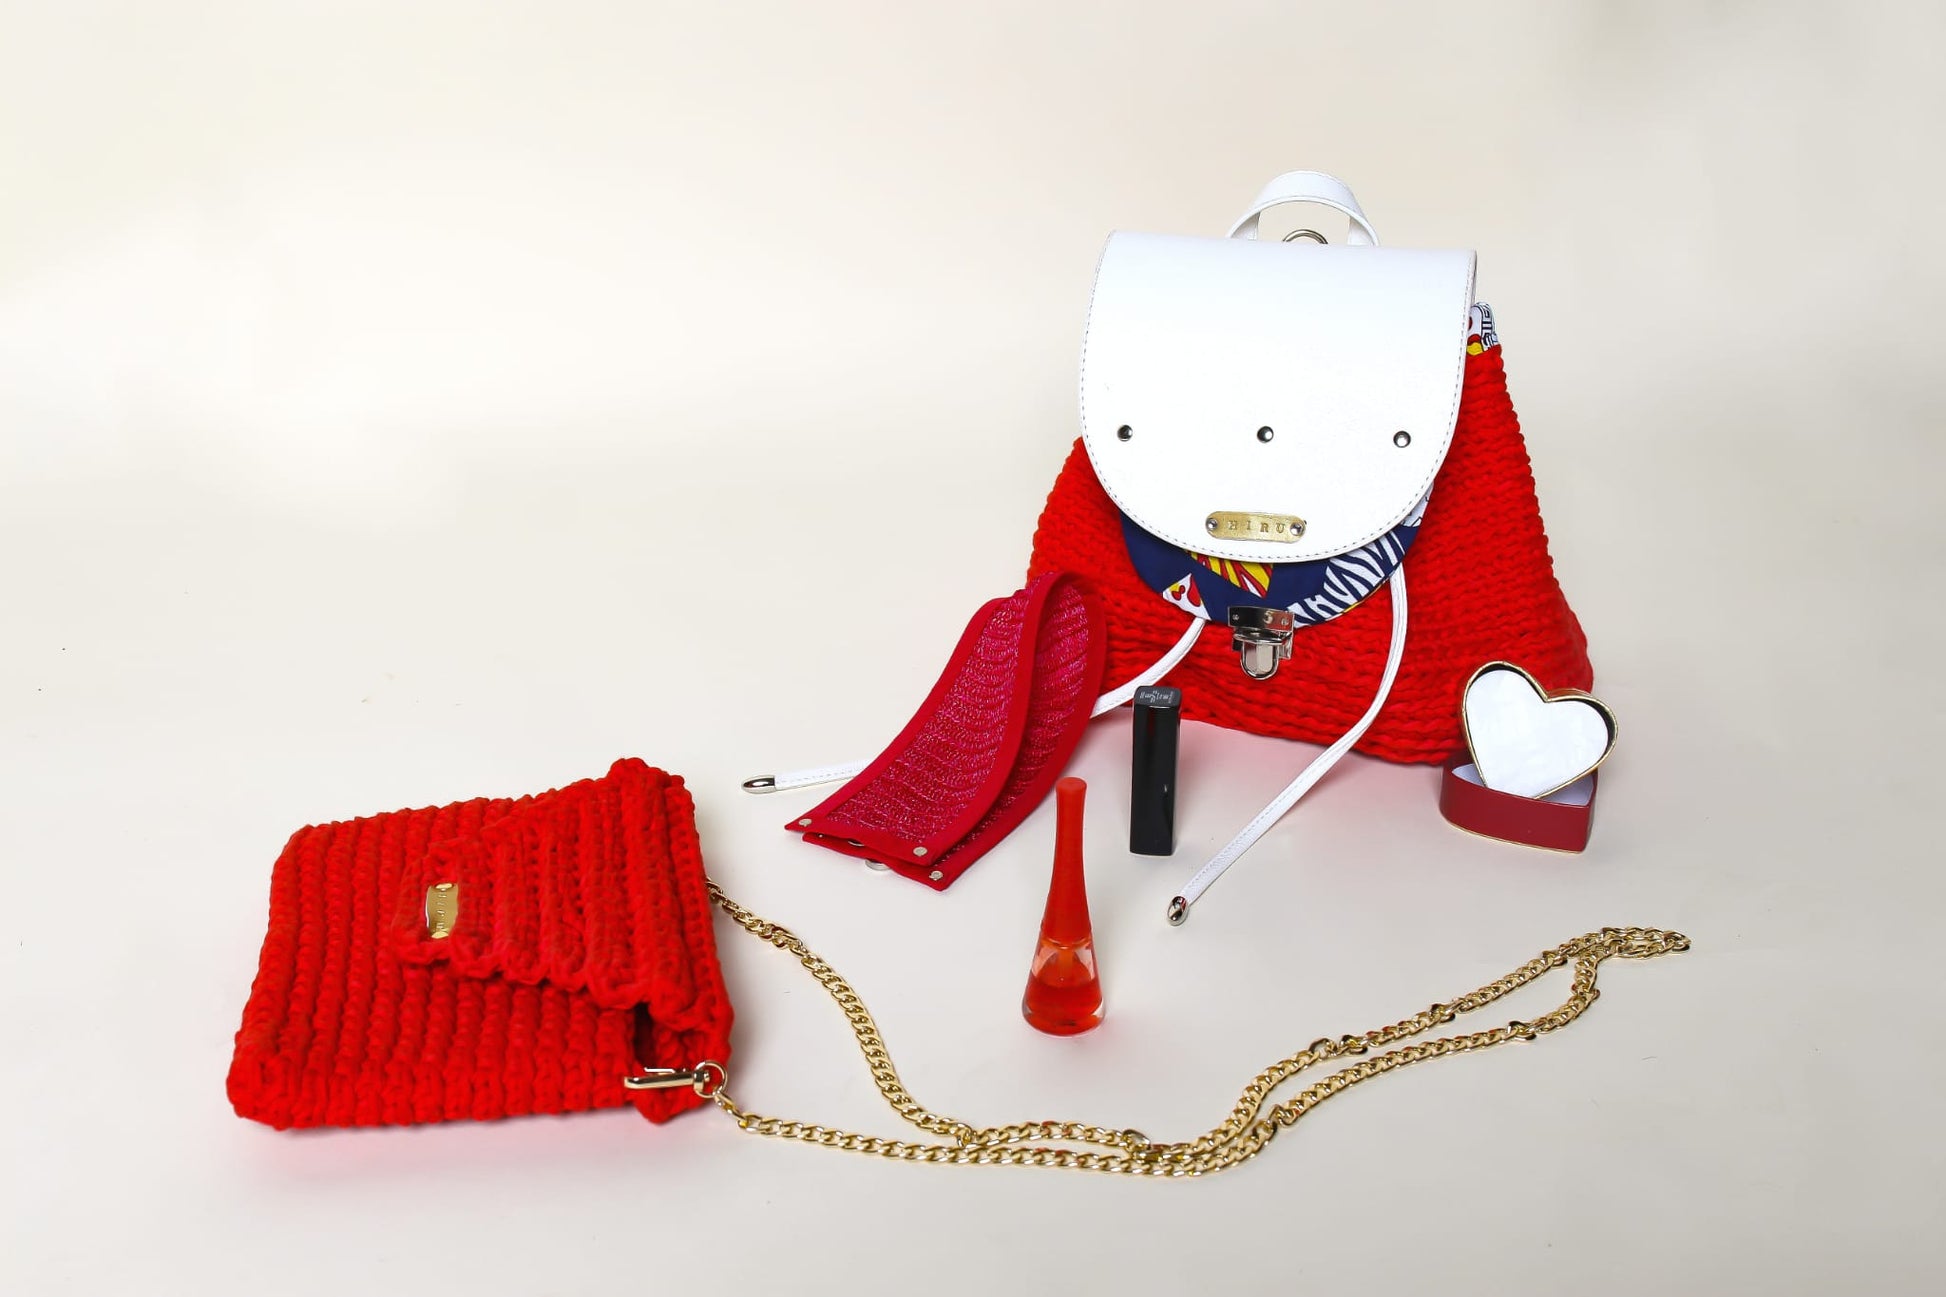 crocheted, red and white bag, with an African style print. Shown with a red crocheted clutch bag and red neackwear accessory. 